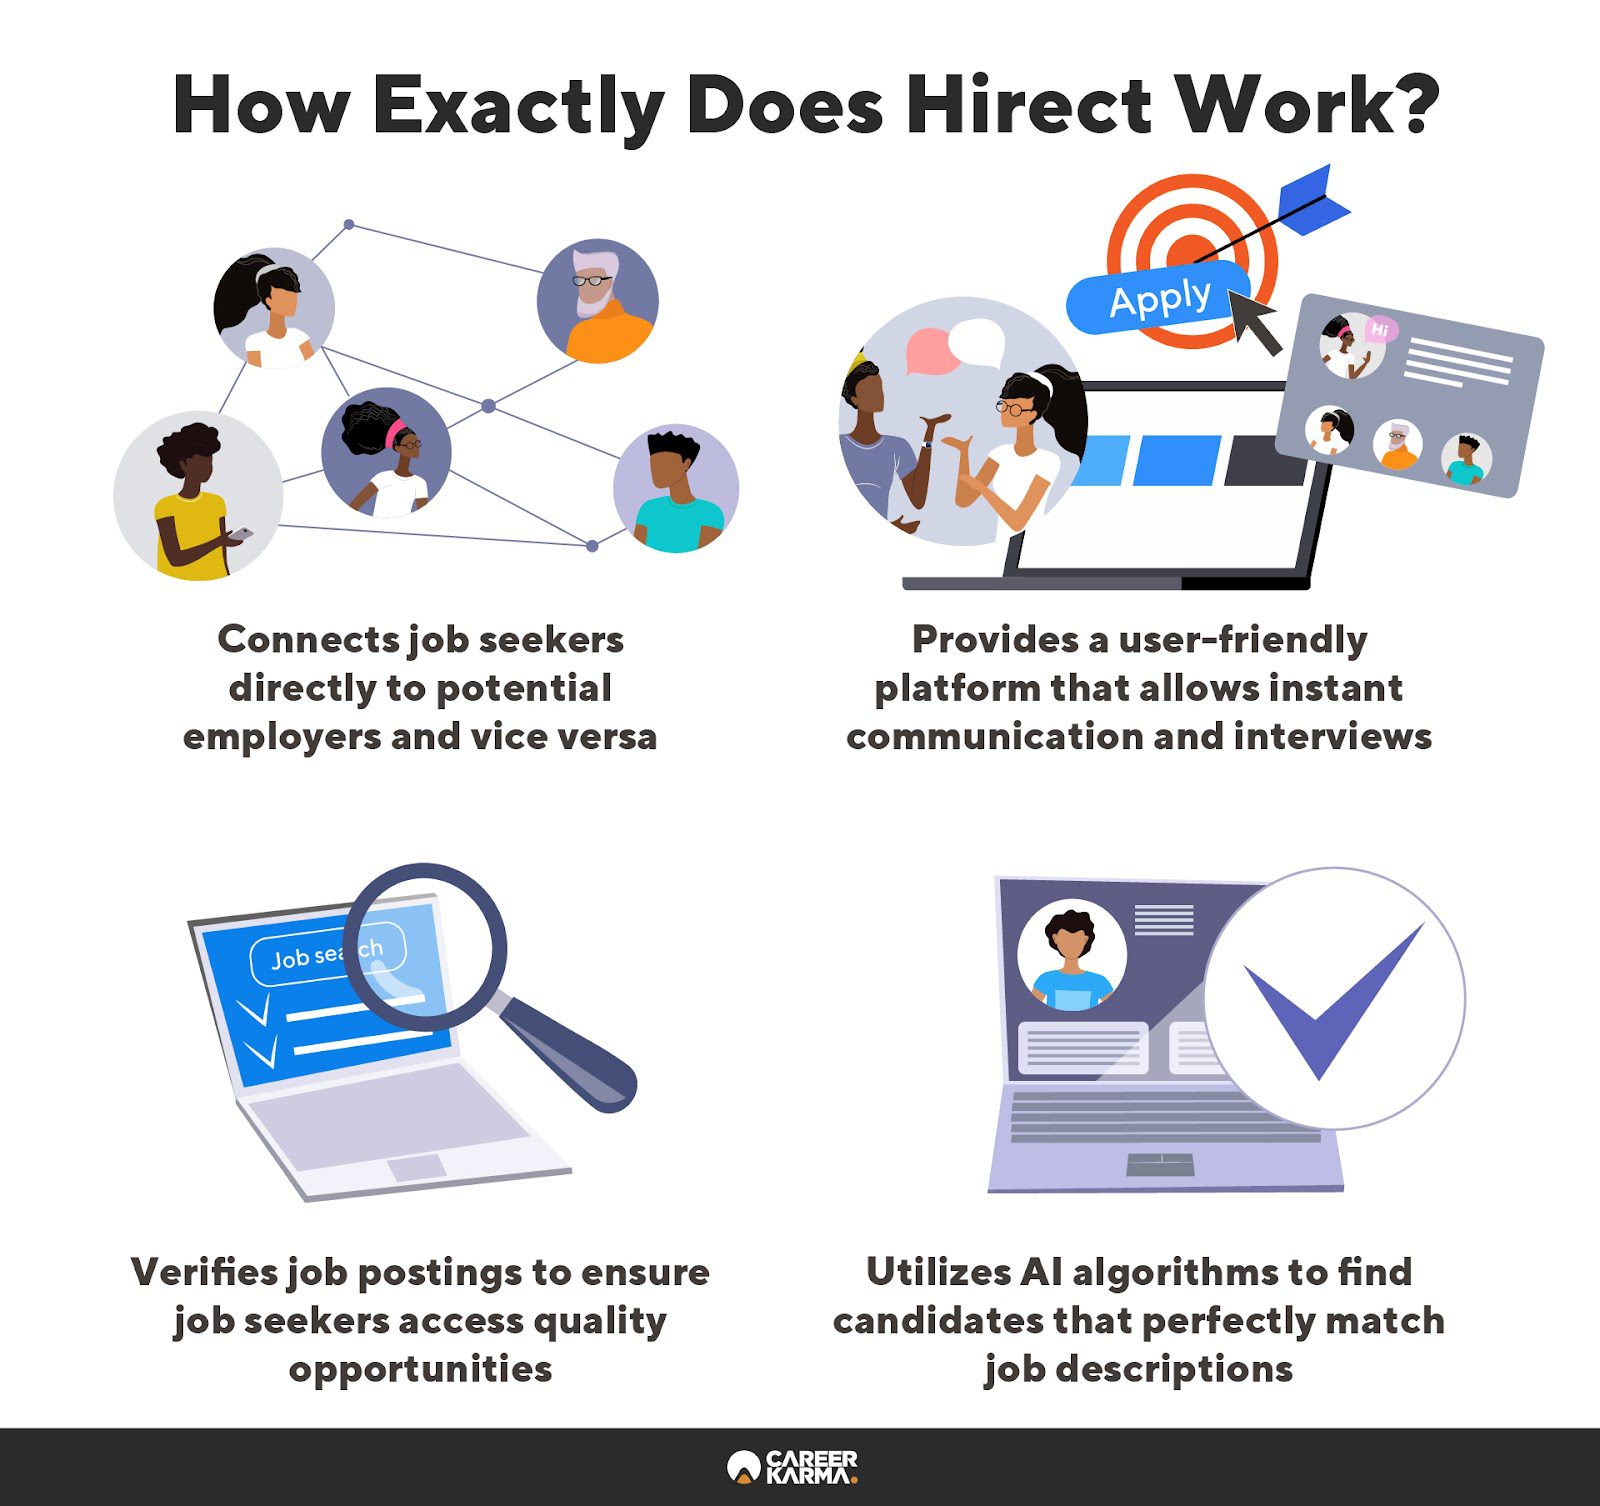 An infographic highlighting how Hirect works